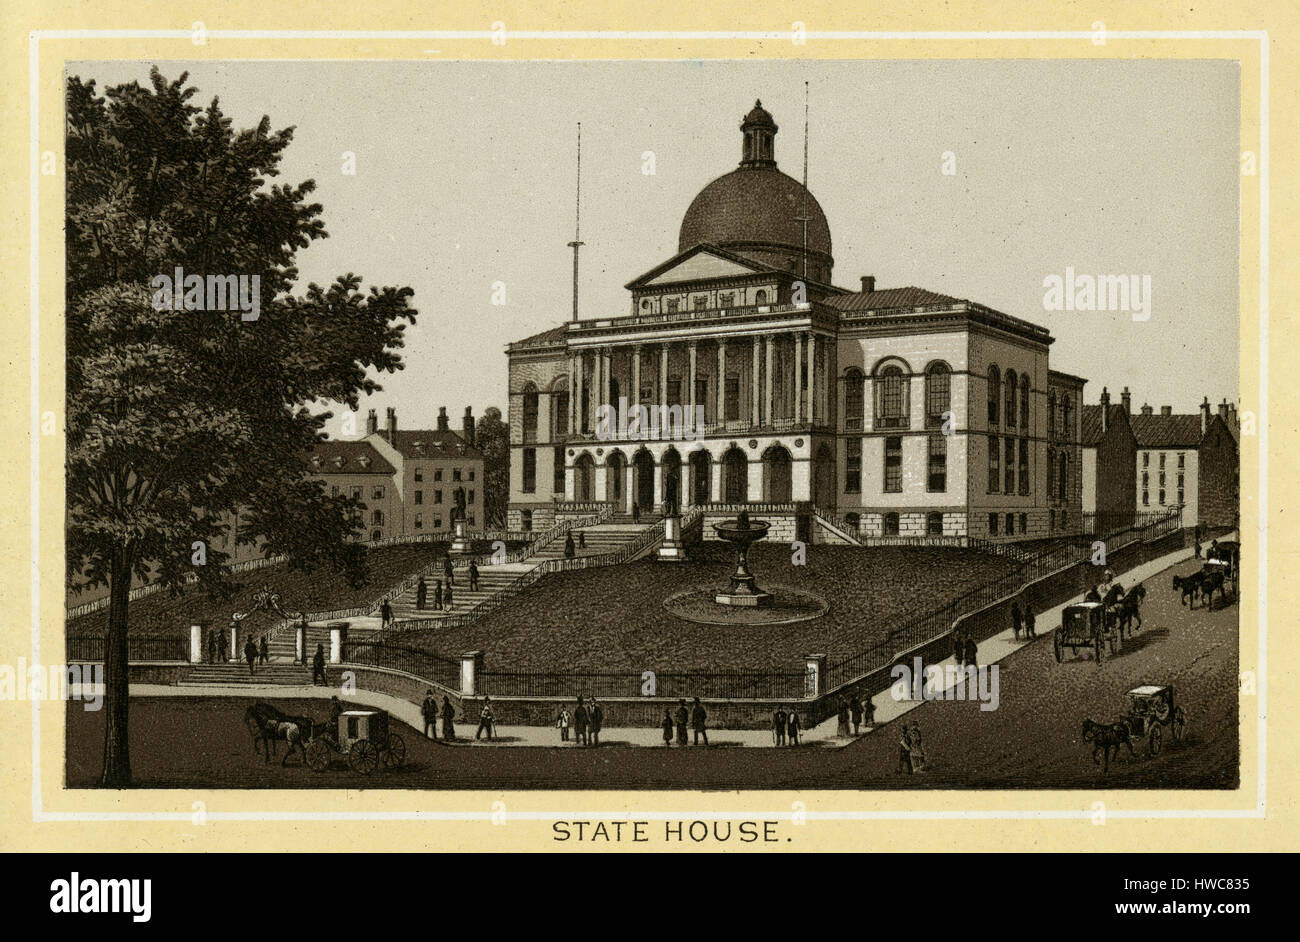 Antique 1883 monochromatic print from a souvenir album, showing the Massachusetts State House. The Massachusetts State House, also known as the Massachusetts Statehouse or the New State House, is the state capitol and seat of government for the Commonwealth of Massachusetts, located in the Beacon Hill/Downtown neighborhood of Boston. Printed with the Glaser/Frey lithographic process, a multi-stone lithographic process developed in Germany. Stock Photo